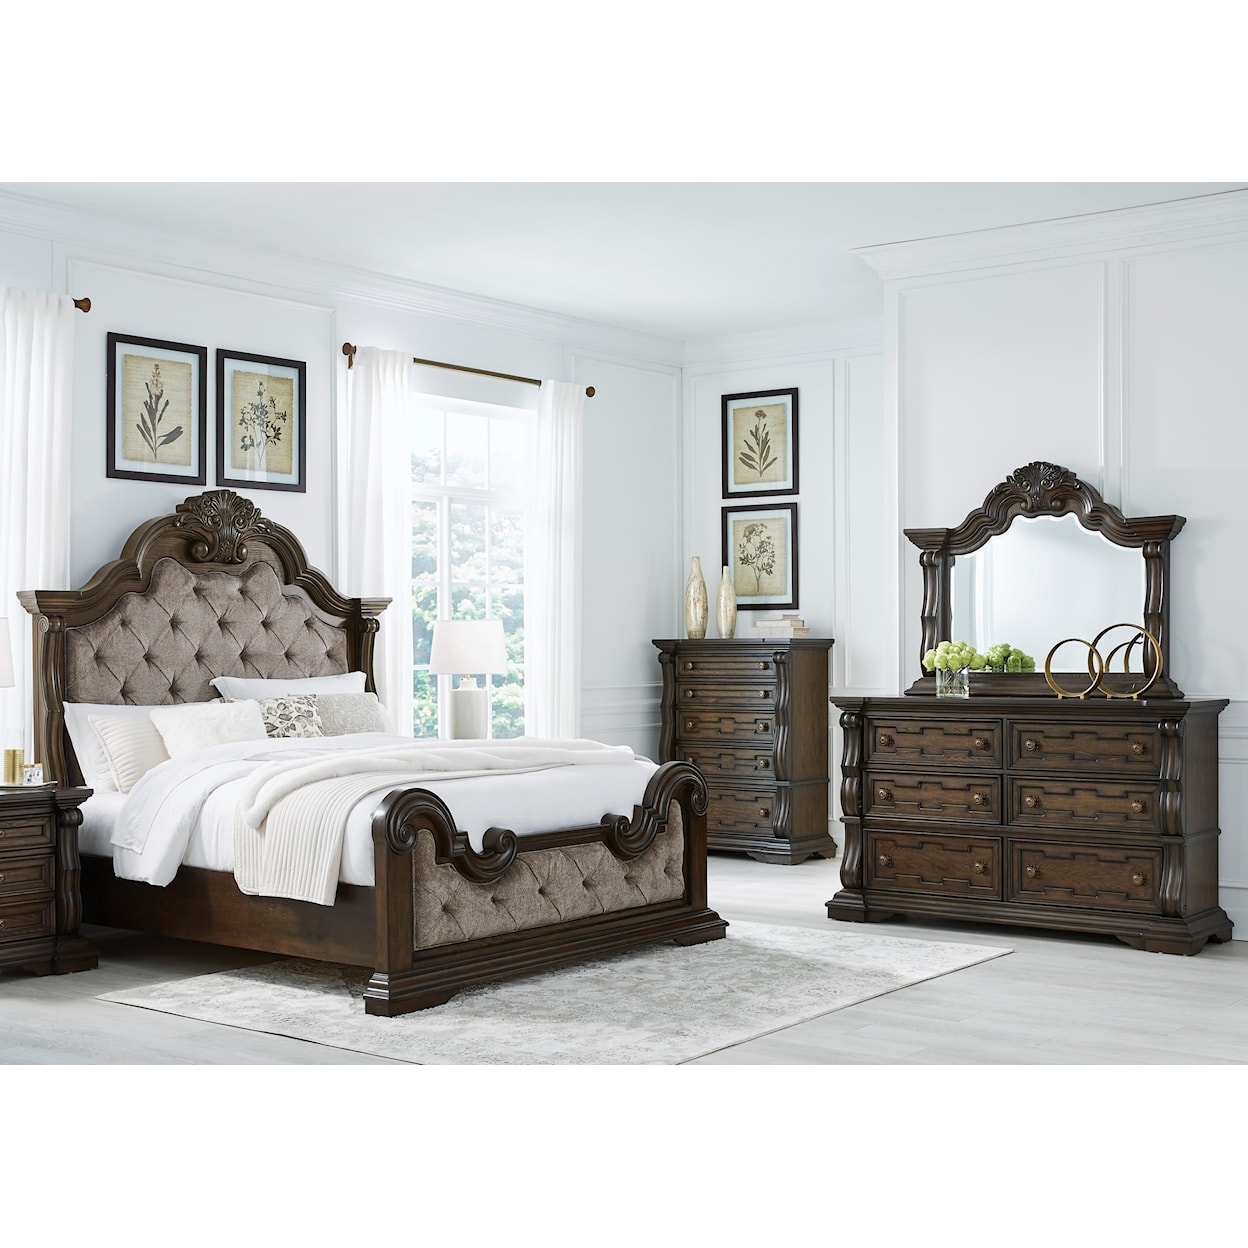 Signature Design by Ashley Maylee California King Bedroom Set